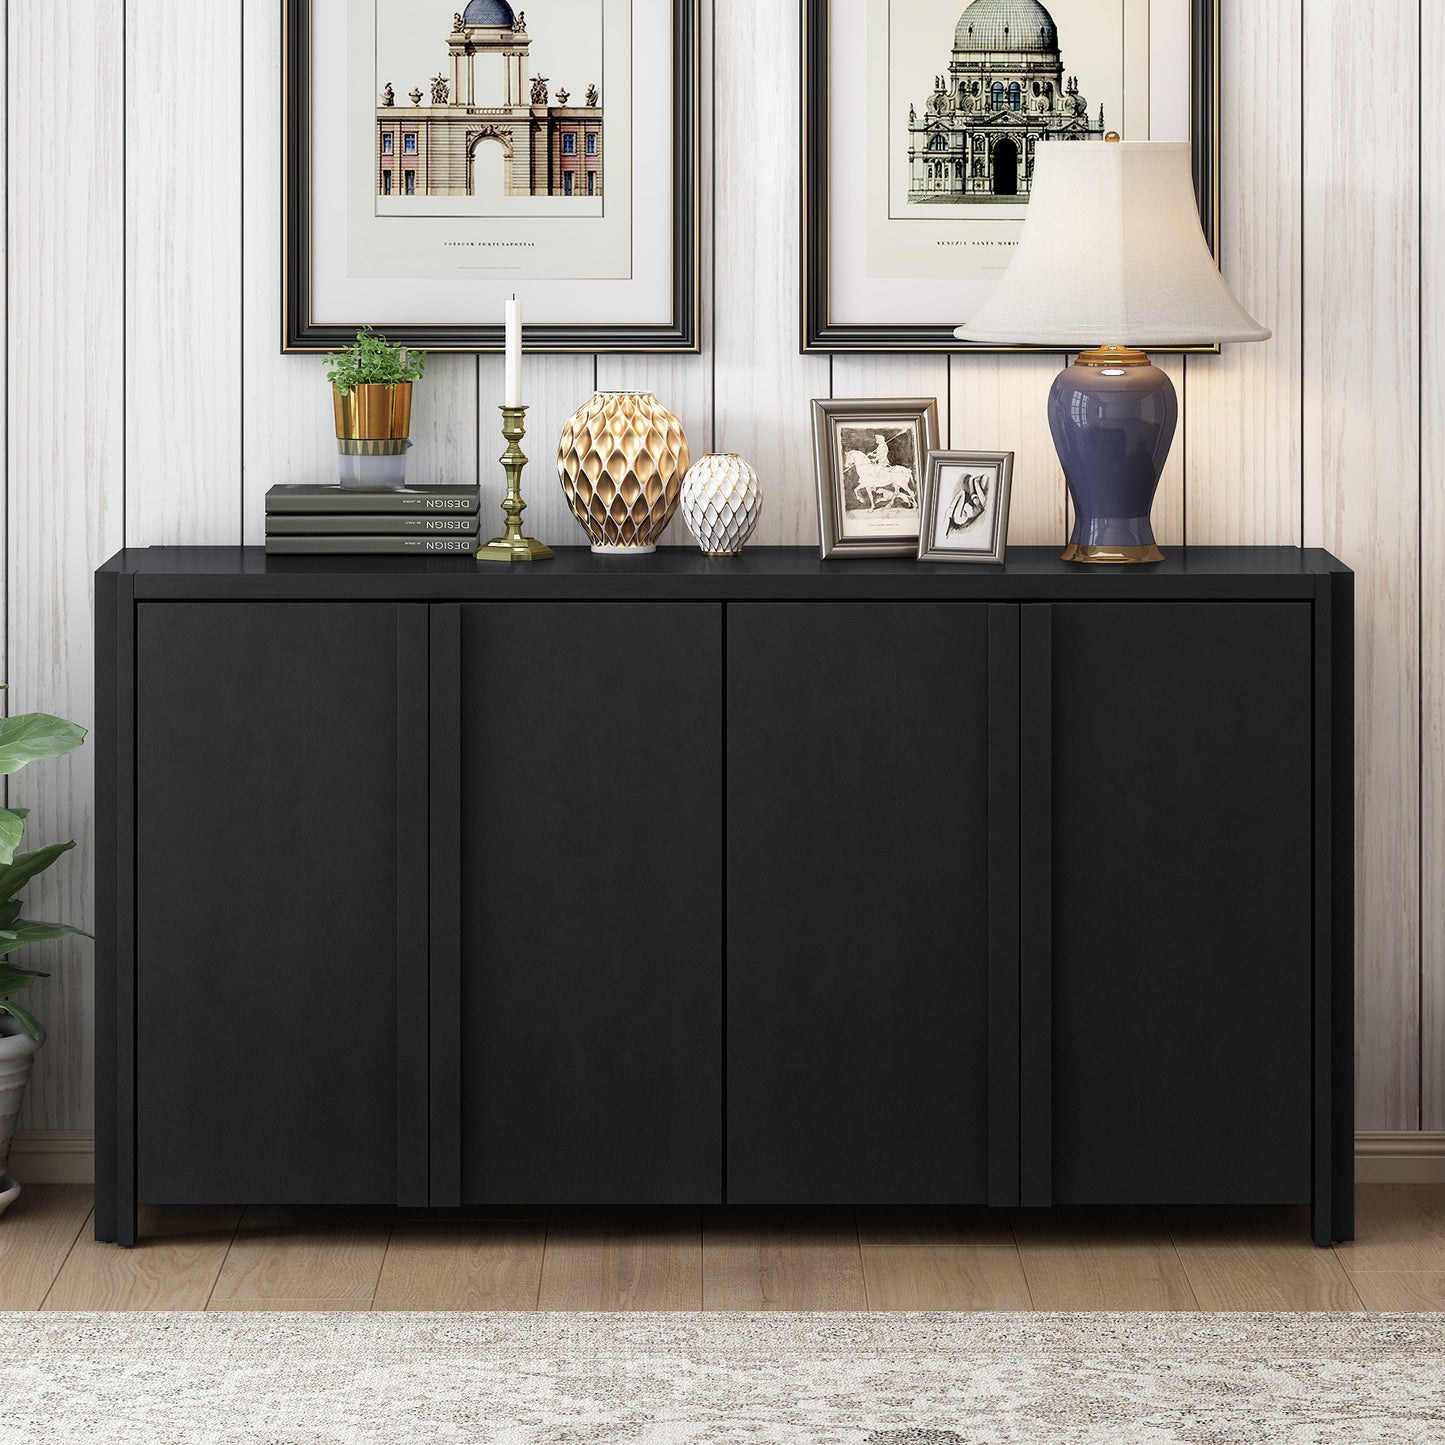 U_Style Designed Storage Cabinet Sideboard with 4 Doors , Adjustable Shelves, Suitable for Living Rooms, Entrance and Study Rooms.